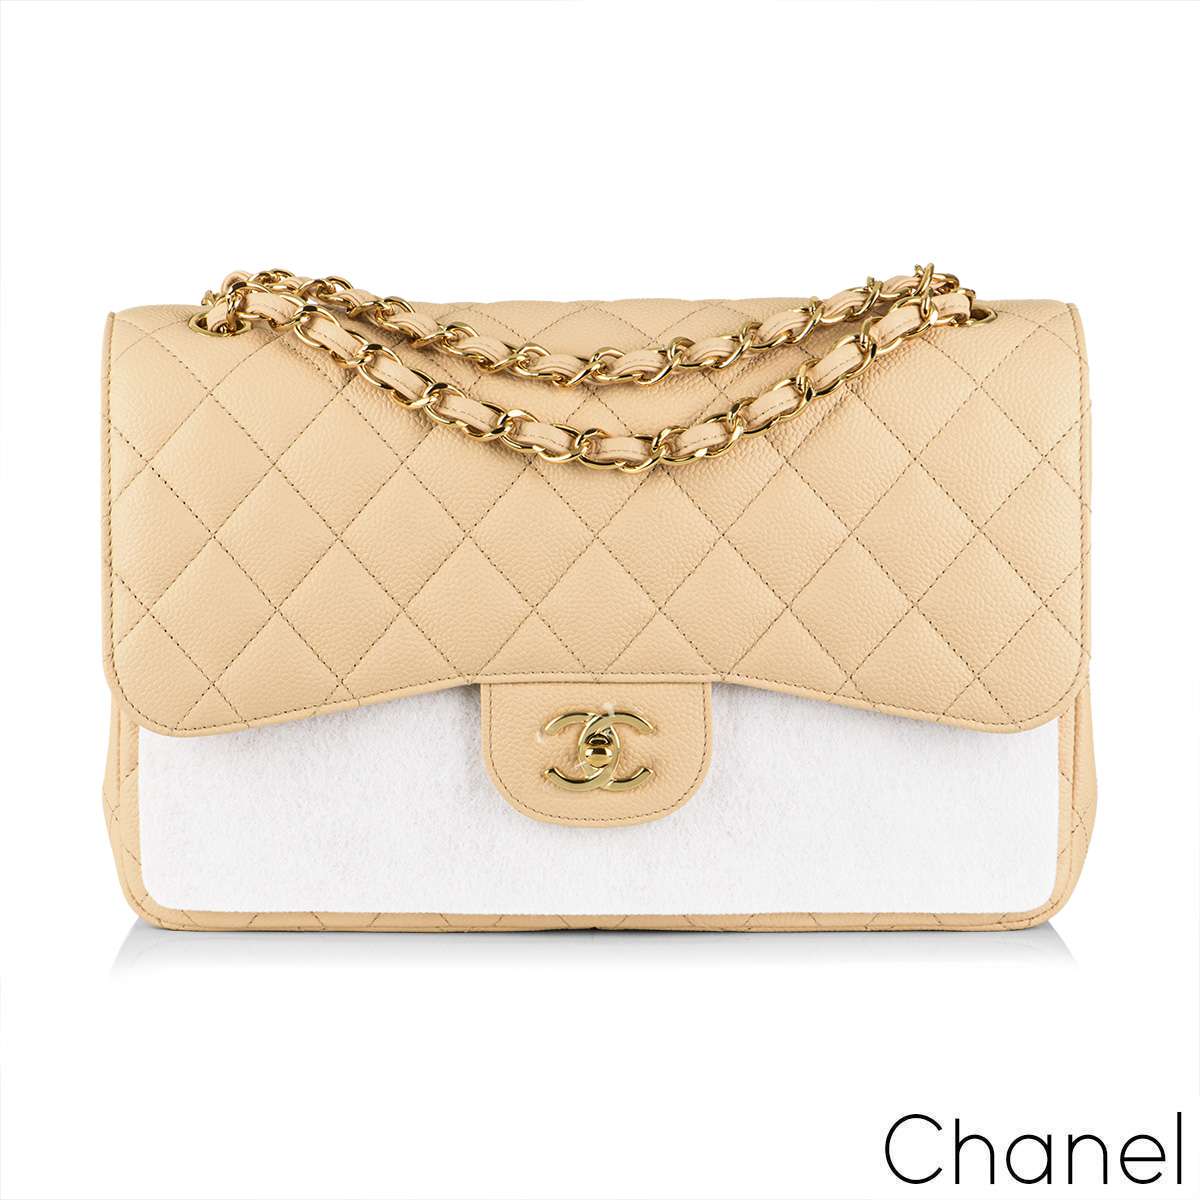 Chanel Classic Jumbo Black Caviar Double Flap SHW wAuthenticity Cert   Gian hàng online